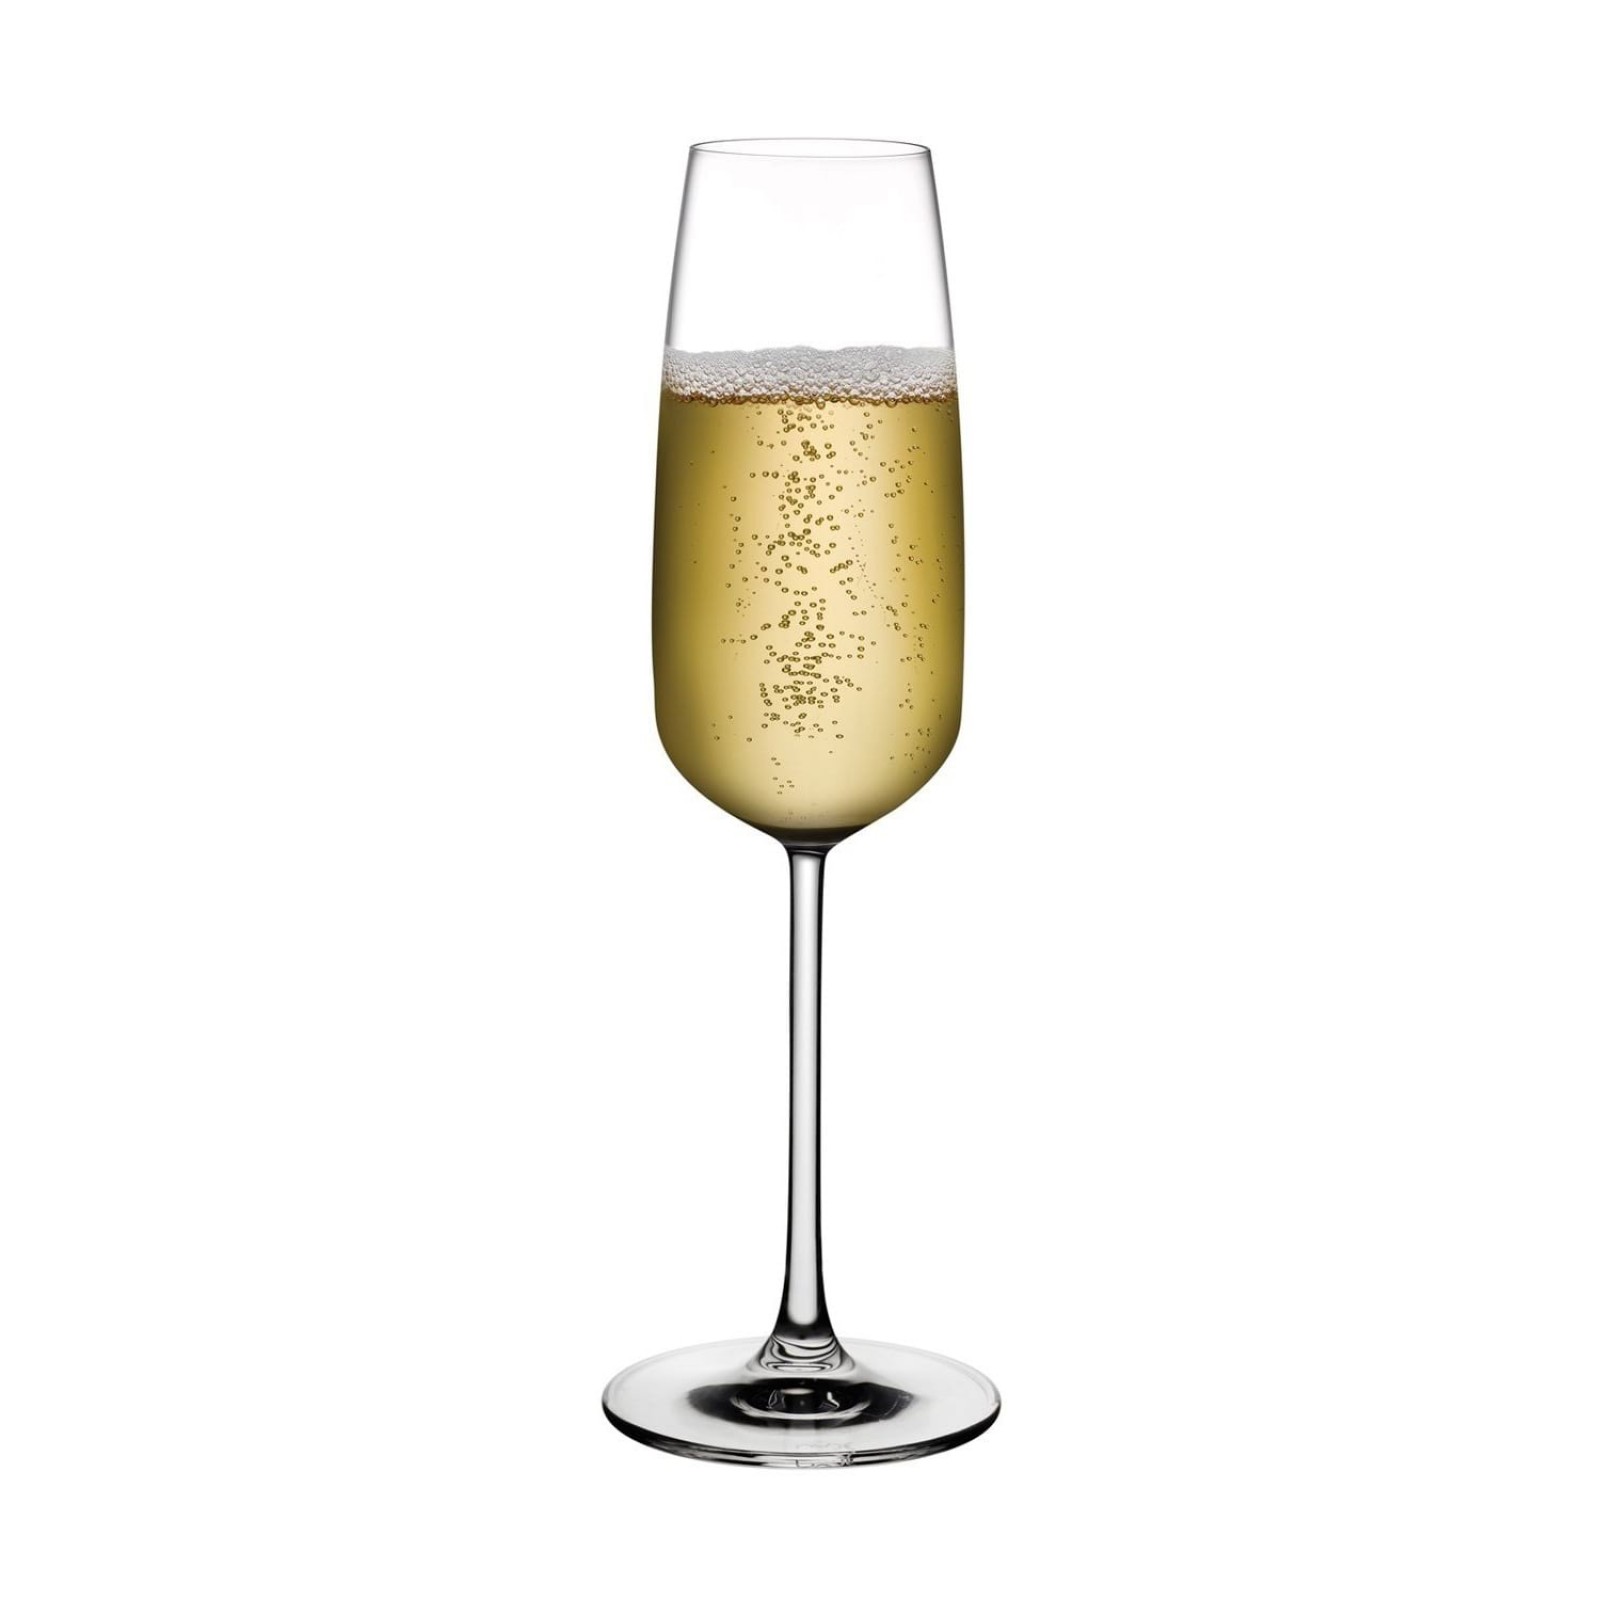 Mirage Champagne Glasses 245 ml (Set of 6) - Nude Glass